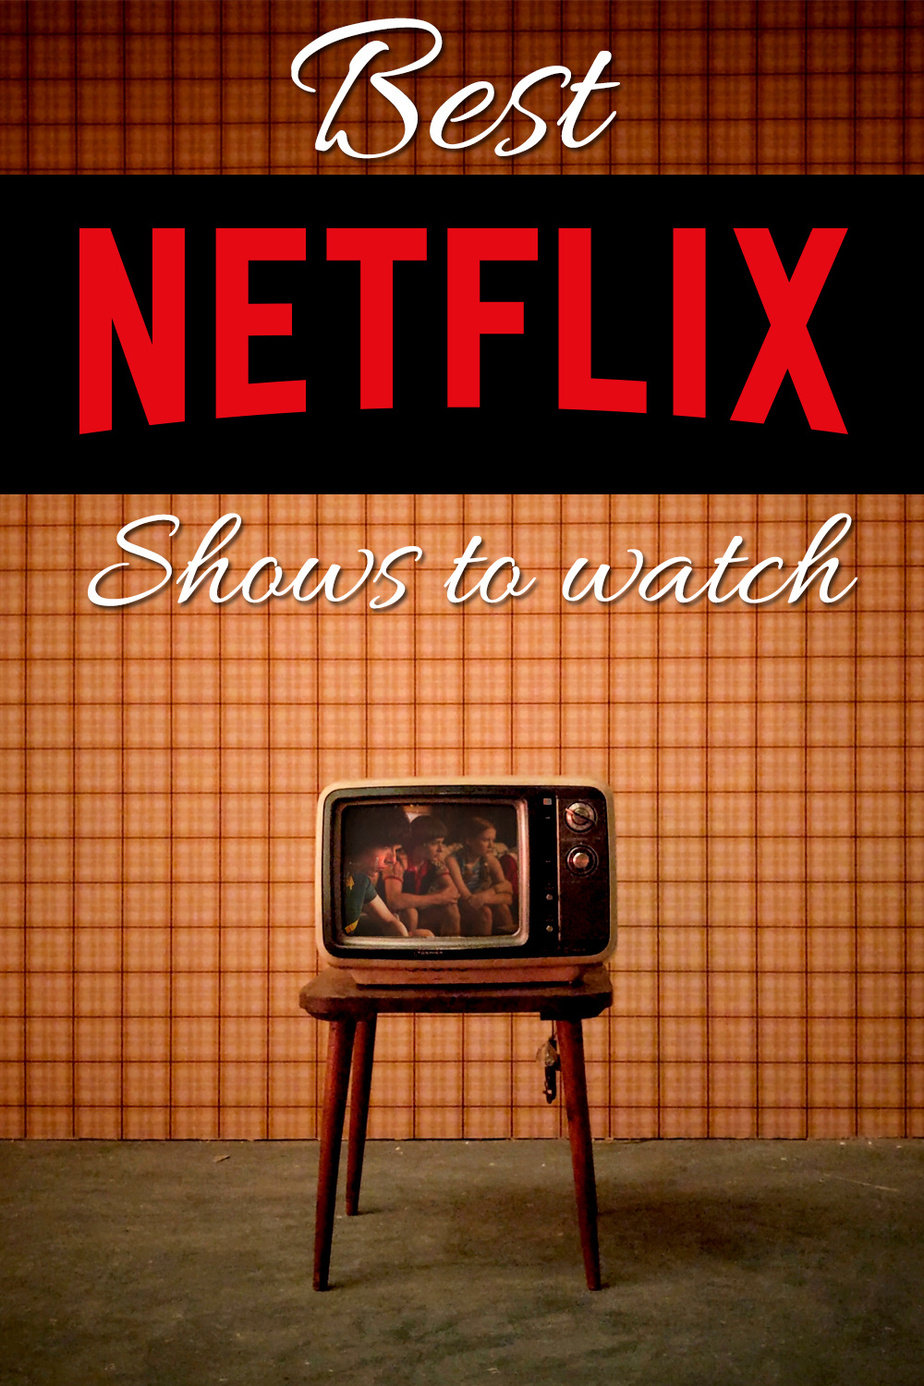 The best Netflix shows 2019 add to an already extensive list of Netflix shows to watch with friends, family, or alone on the couch. Best Netflix Shows 2019 | Best New Netflix Shows | Best Things to Watch on Netflix | What to Watch on Netflix | Best Things to Stream | Netflix Originals | New Netflix Shows #netflix